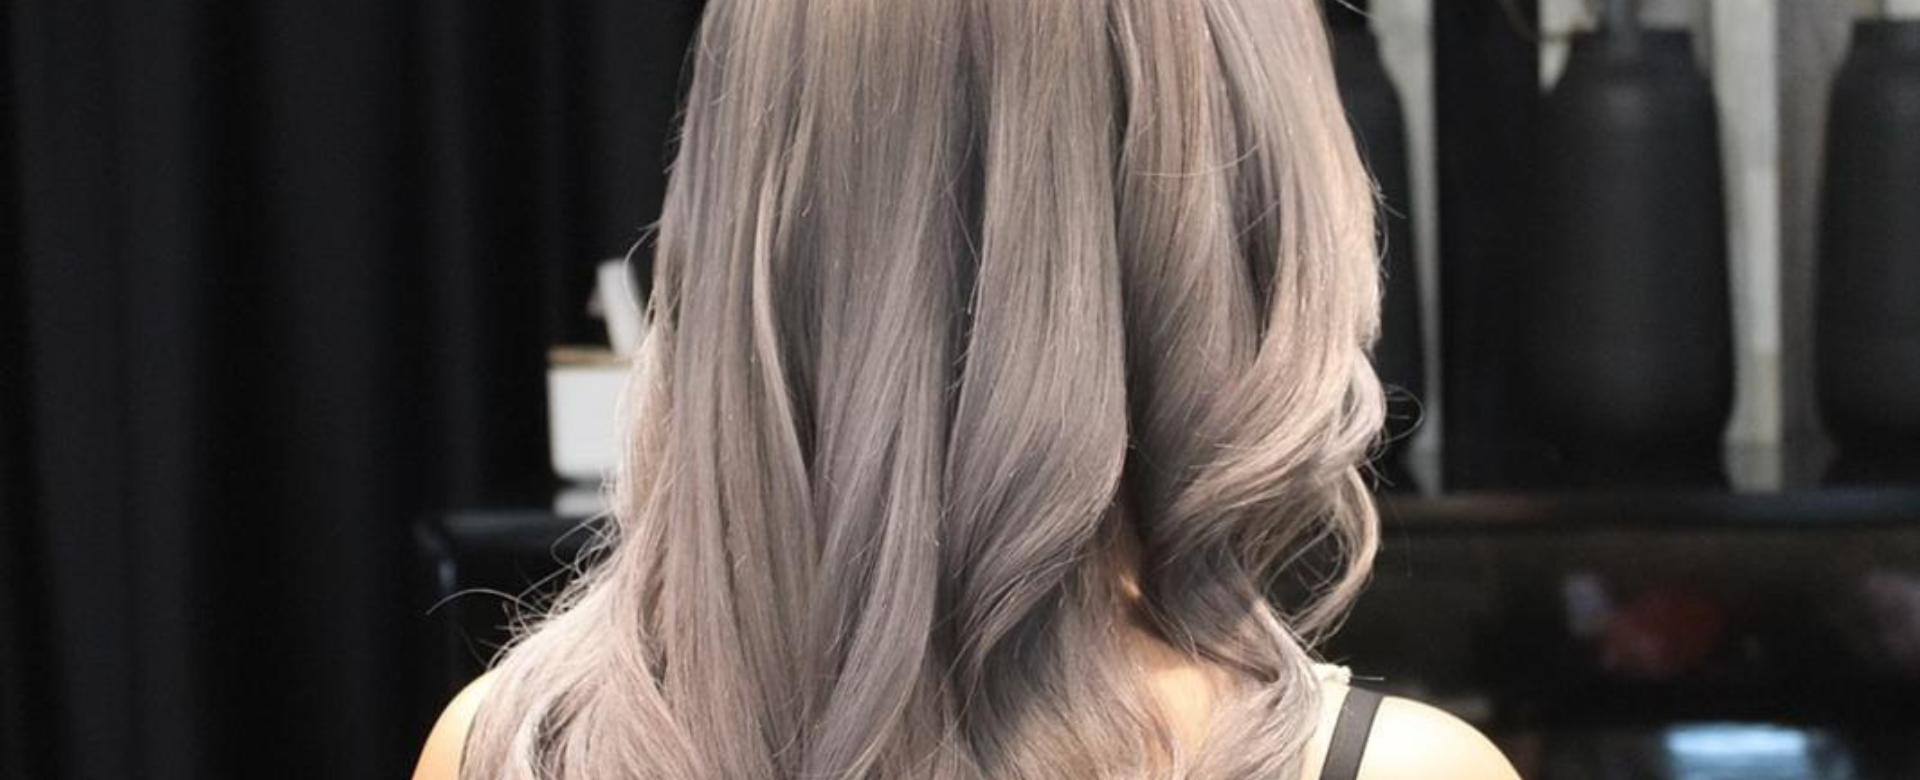 What Kind Of Ash-Grey Hair Should I Get to Match My Skin Tone?